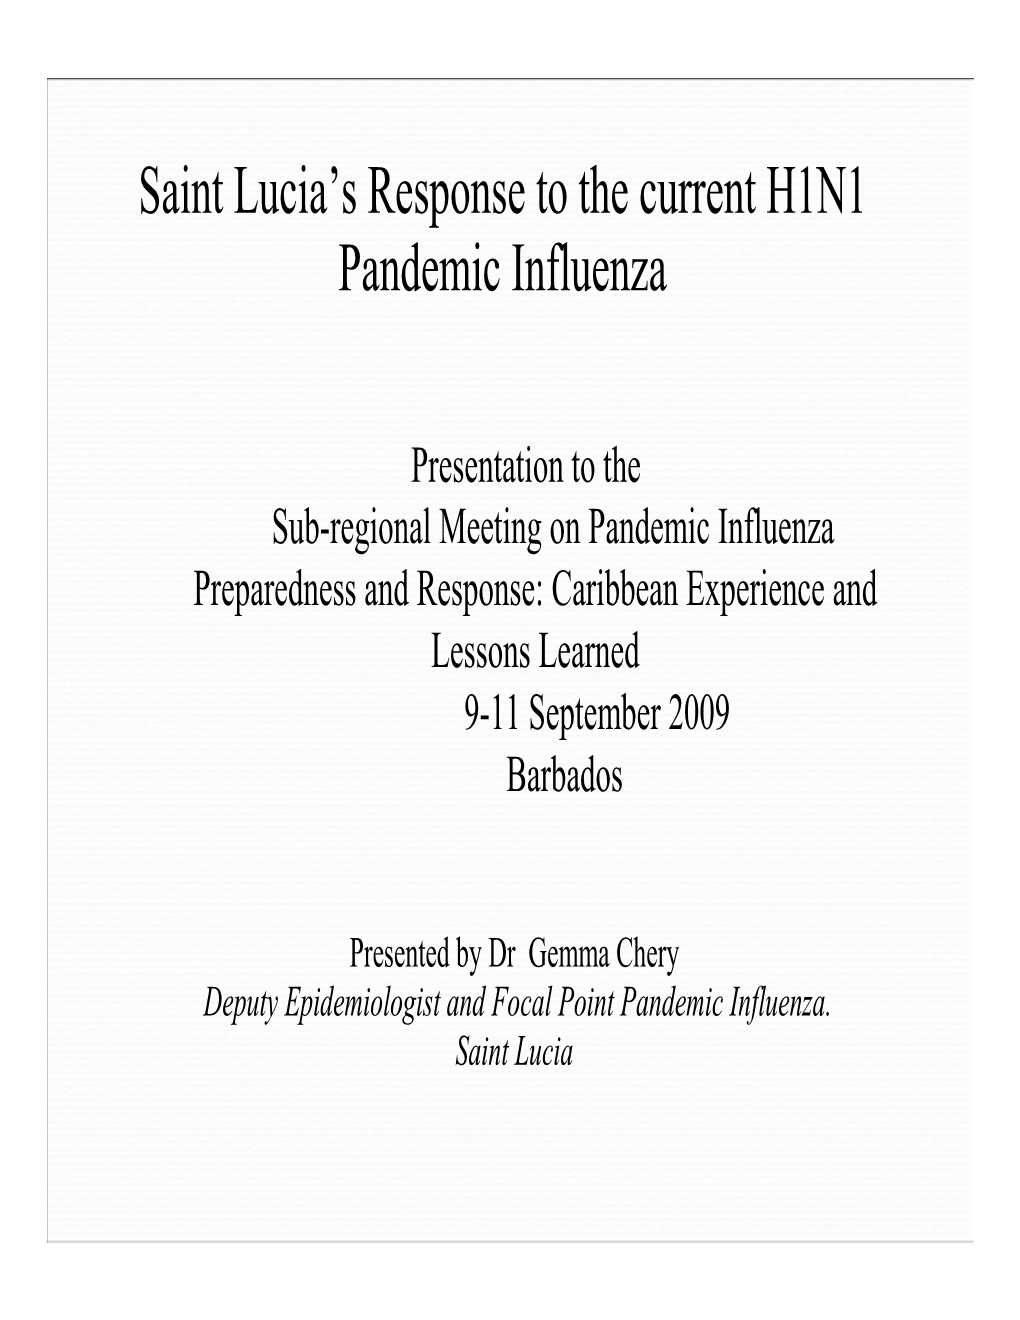 Saint Lucia's Response to the Current H1N1 Pandemic Influenza